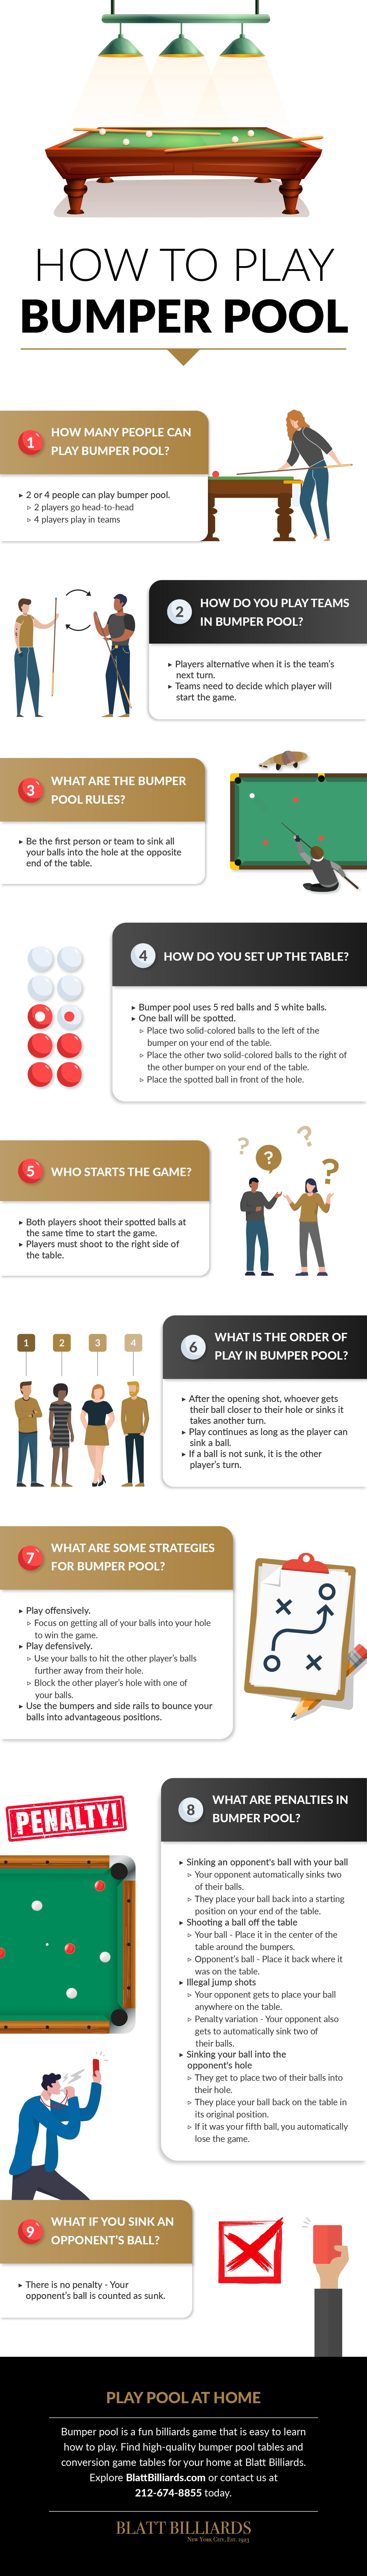 How to Play Bumper Pool Infographic